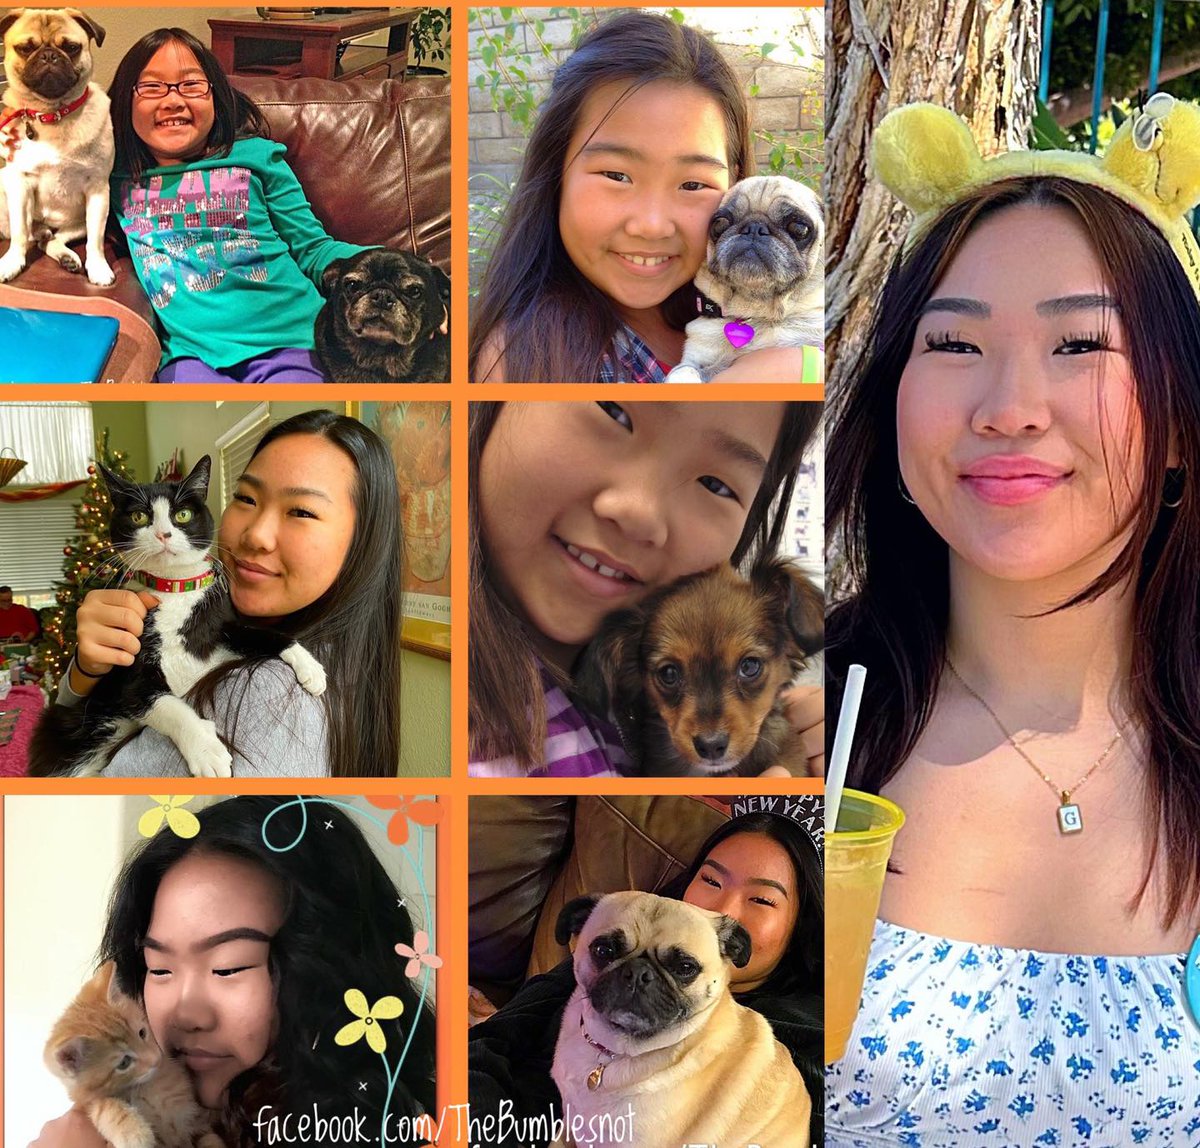 It's a special birthday week here in Bumbleland! Our Young Lady is now officially an adult! Seems like just yesterday she was 'The Little Girl'... She still loves all animals, especially The Bunch, and we love her more than words can say. Happy birthday, Young Lady! ❤️❤️❤️2⃣1⃣🎉